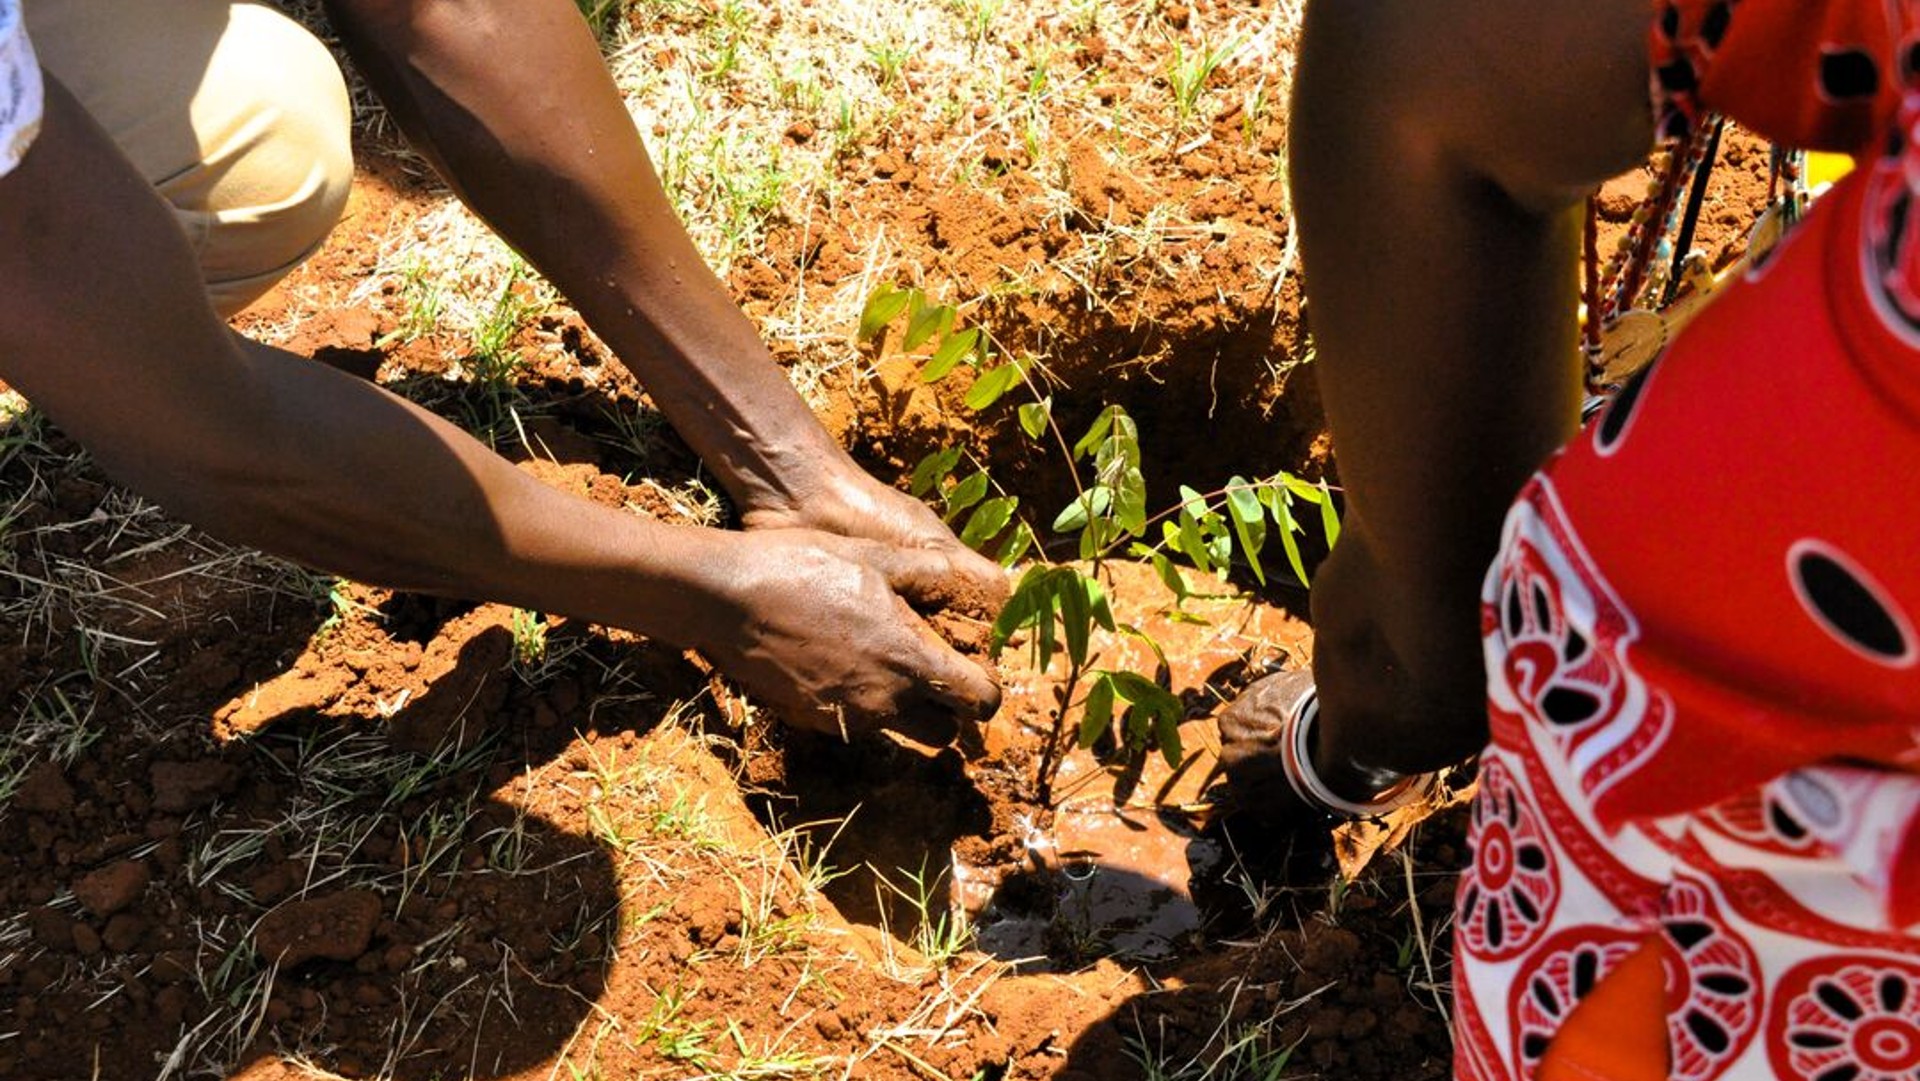 A close-up image of people's hands planting trees into the soil